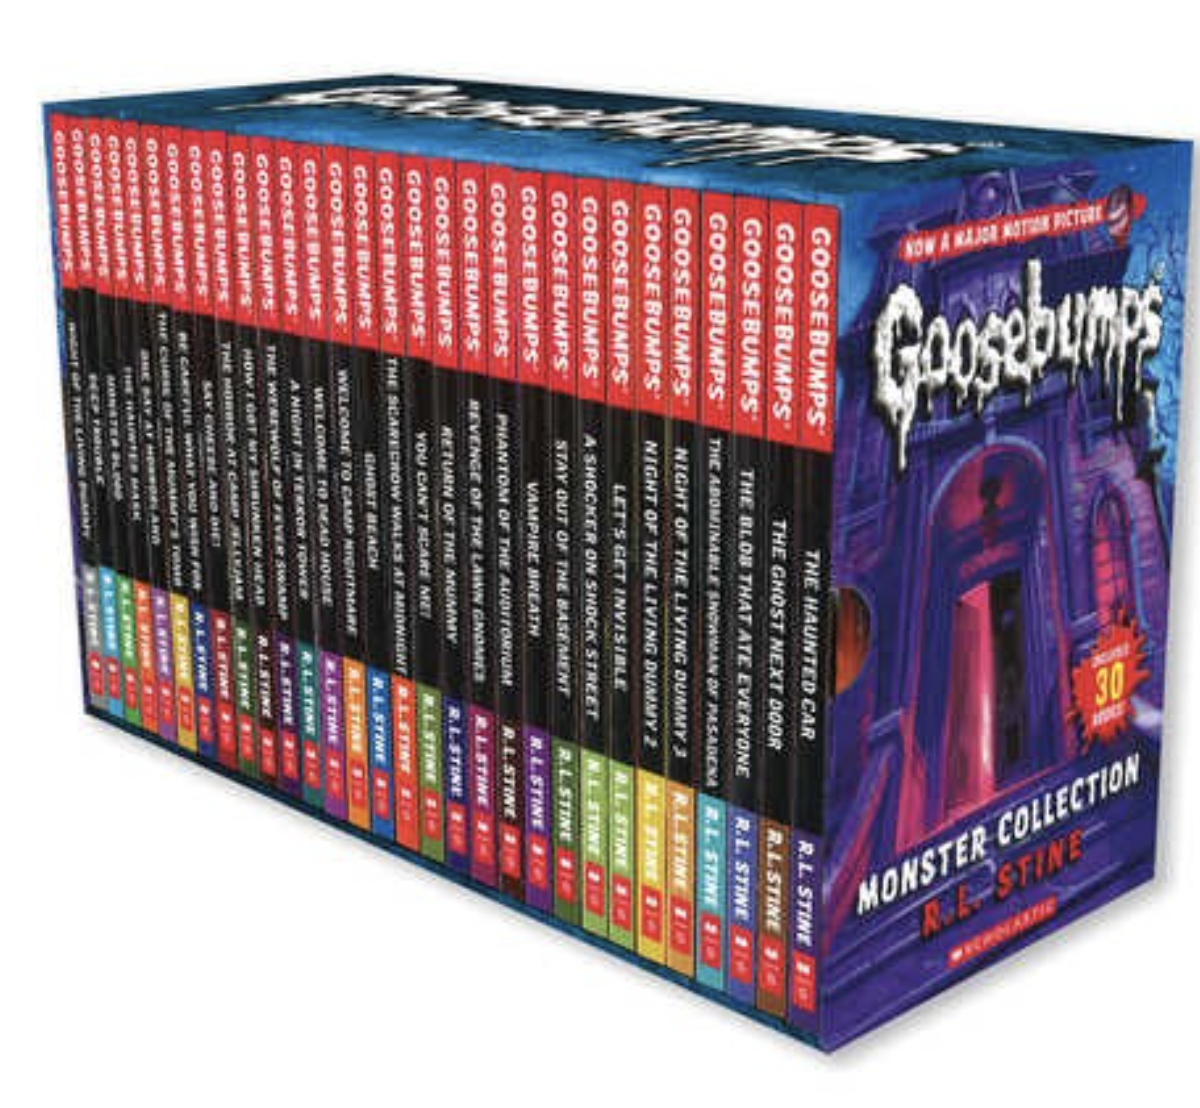 Goosebumps Monster Collection by R.L Stine